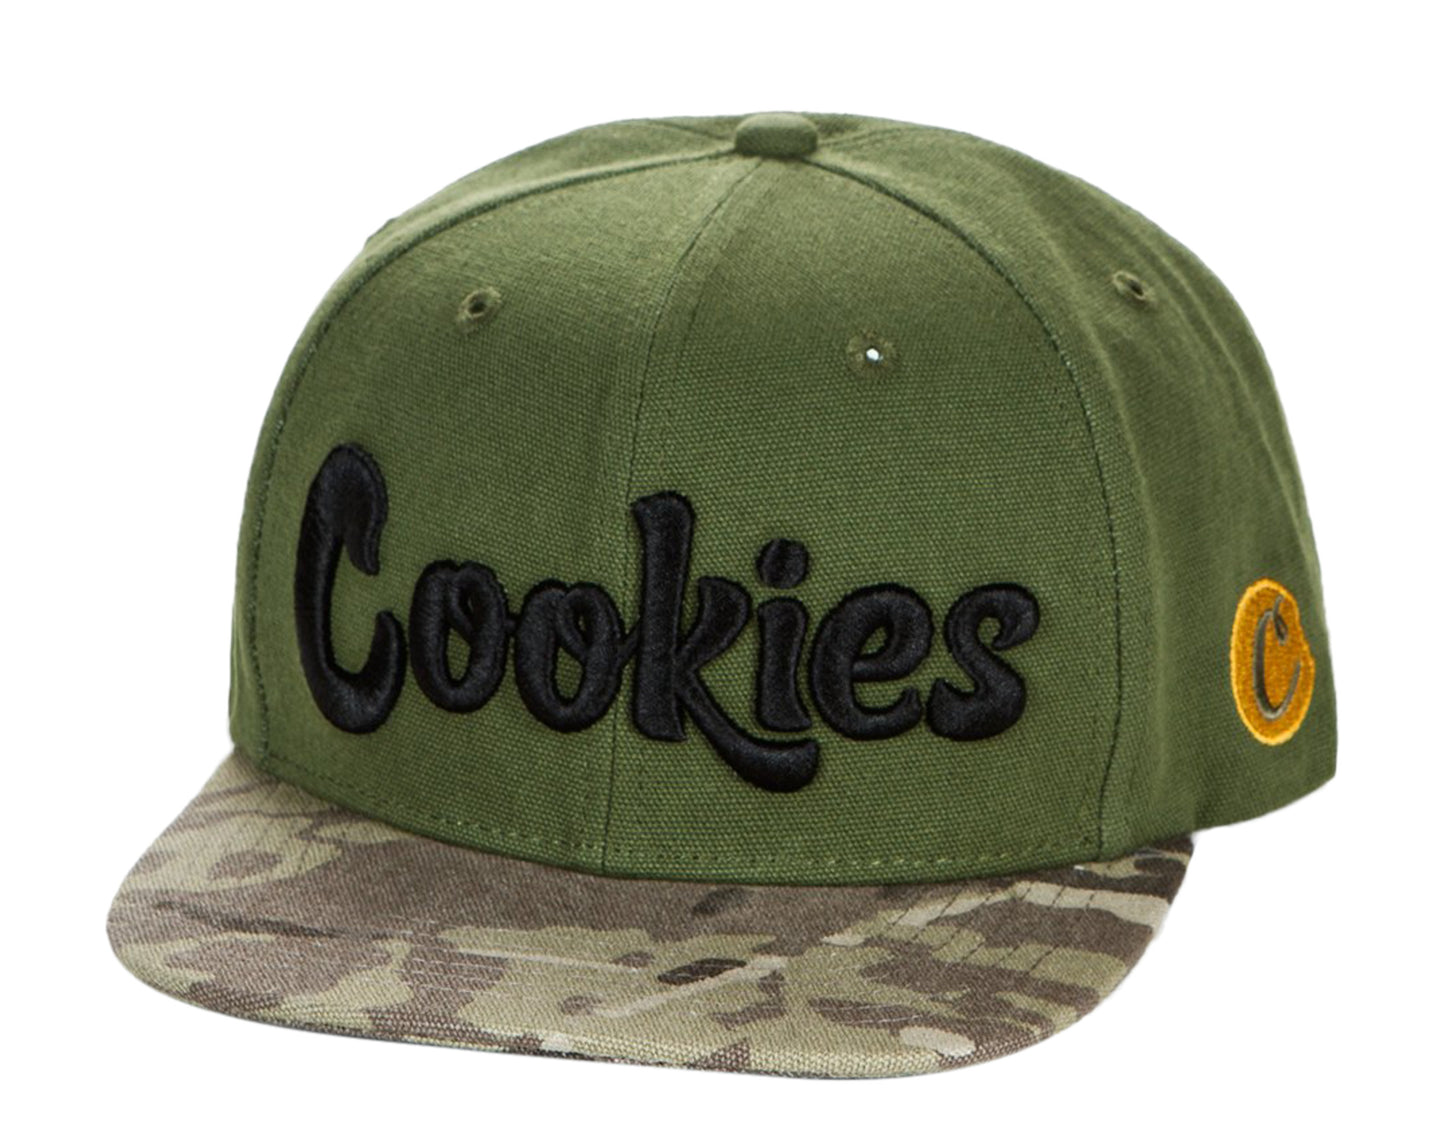 Cookies Backcountry Twill Camo Embroidered Logo Olive Snapback 1546X4319-OLI